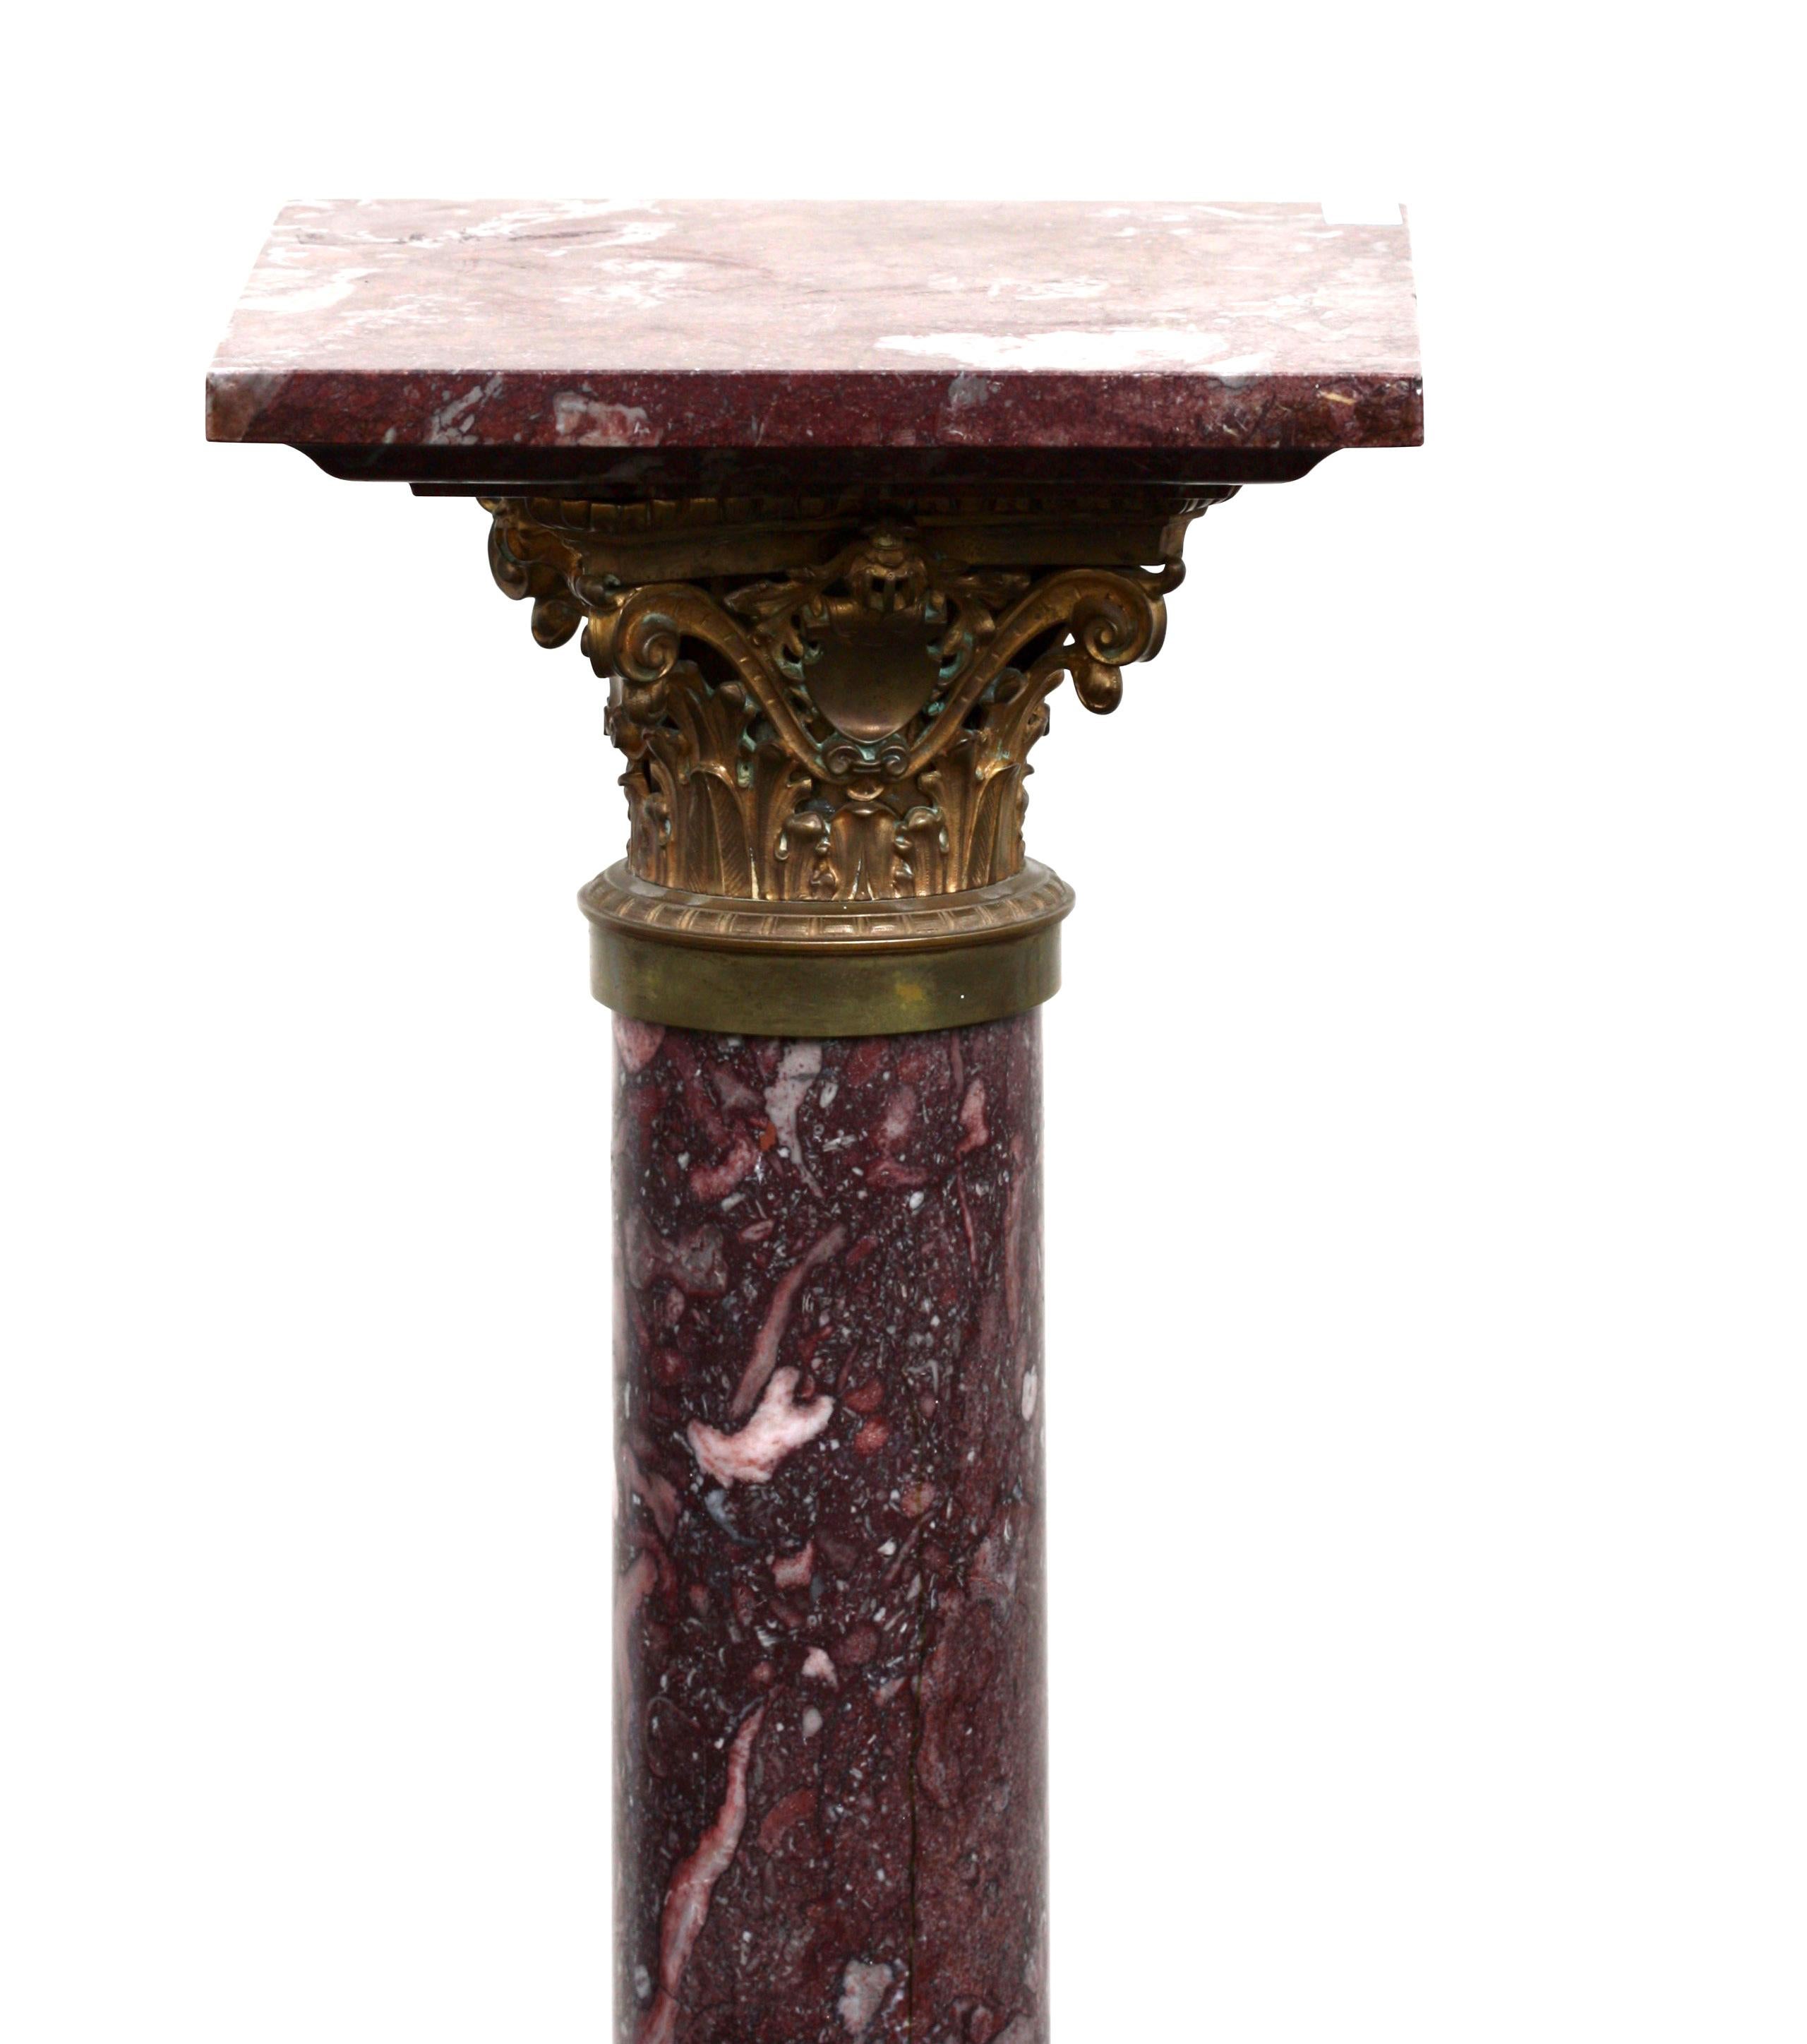 A fine black and rouge marble pedestal column, late 19th century, with gilt bronze mounts,
Measures: Height 43 in. (109.22 cm.), top 11 x 11 in. (27.94 x 27.94 cm.), base 12 by 12 in. (30.48 x 30.48 cm.)